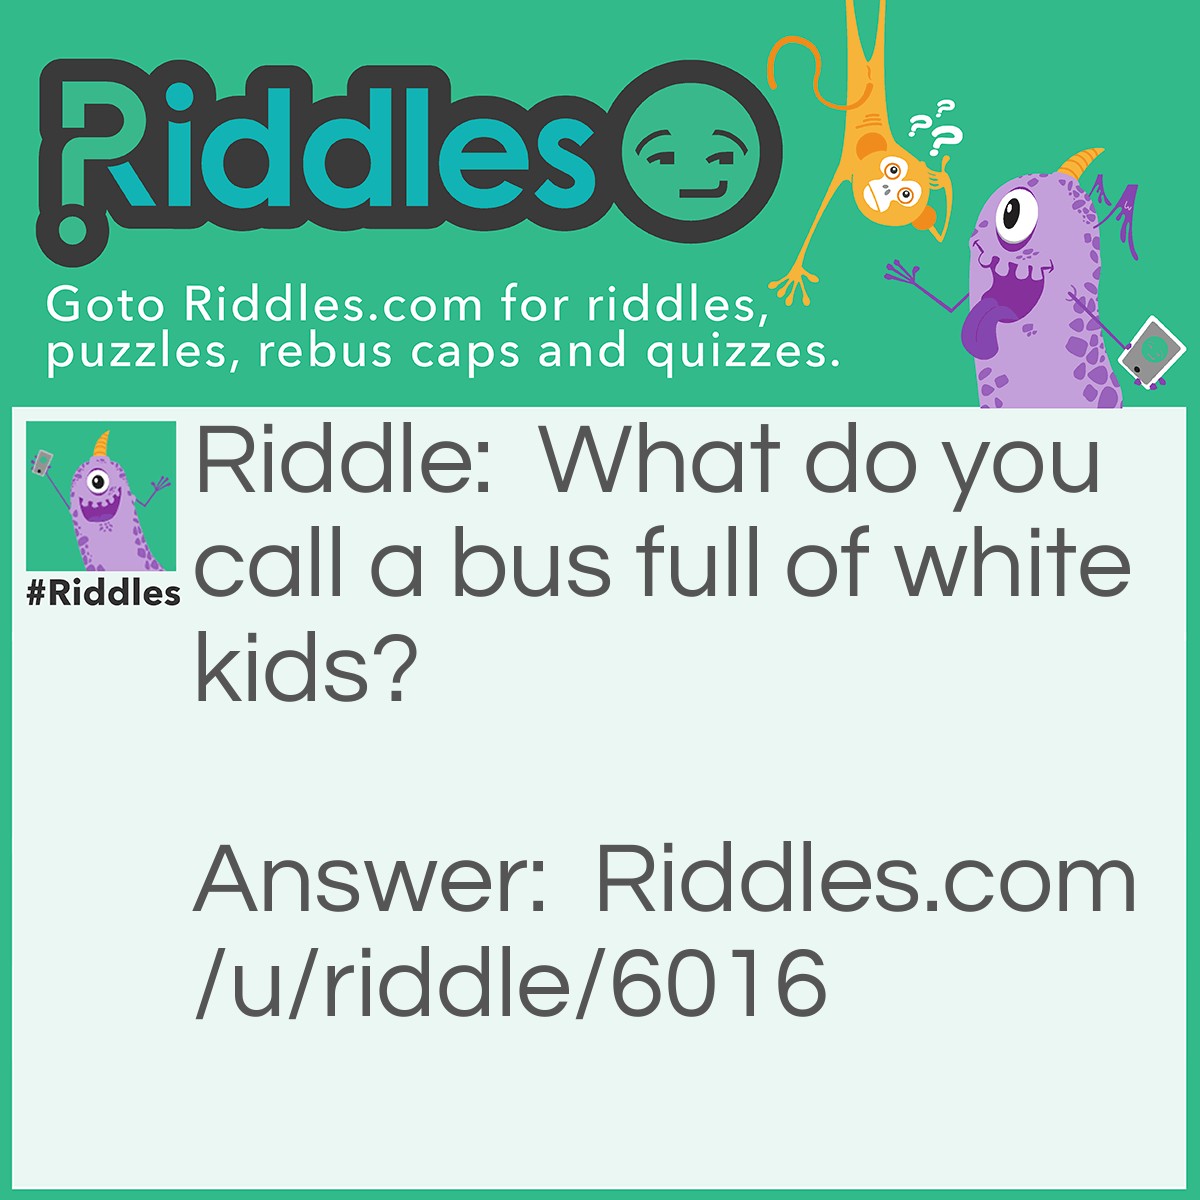 Riddle: What do you call a bus full of white kids? Answer: A twinkie.